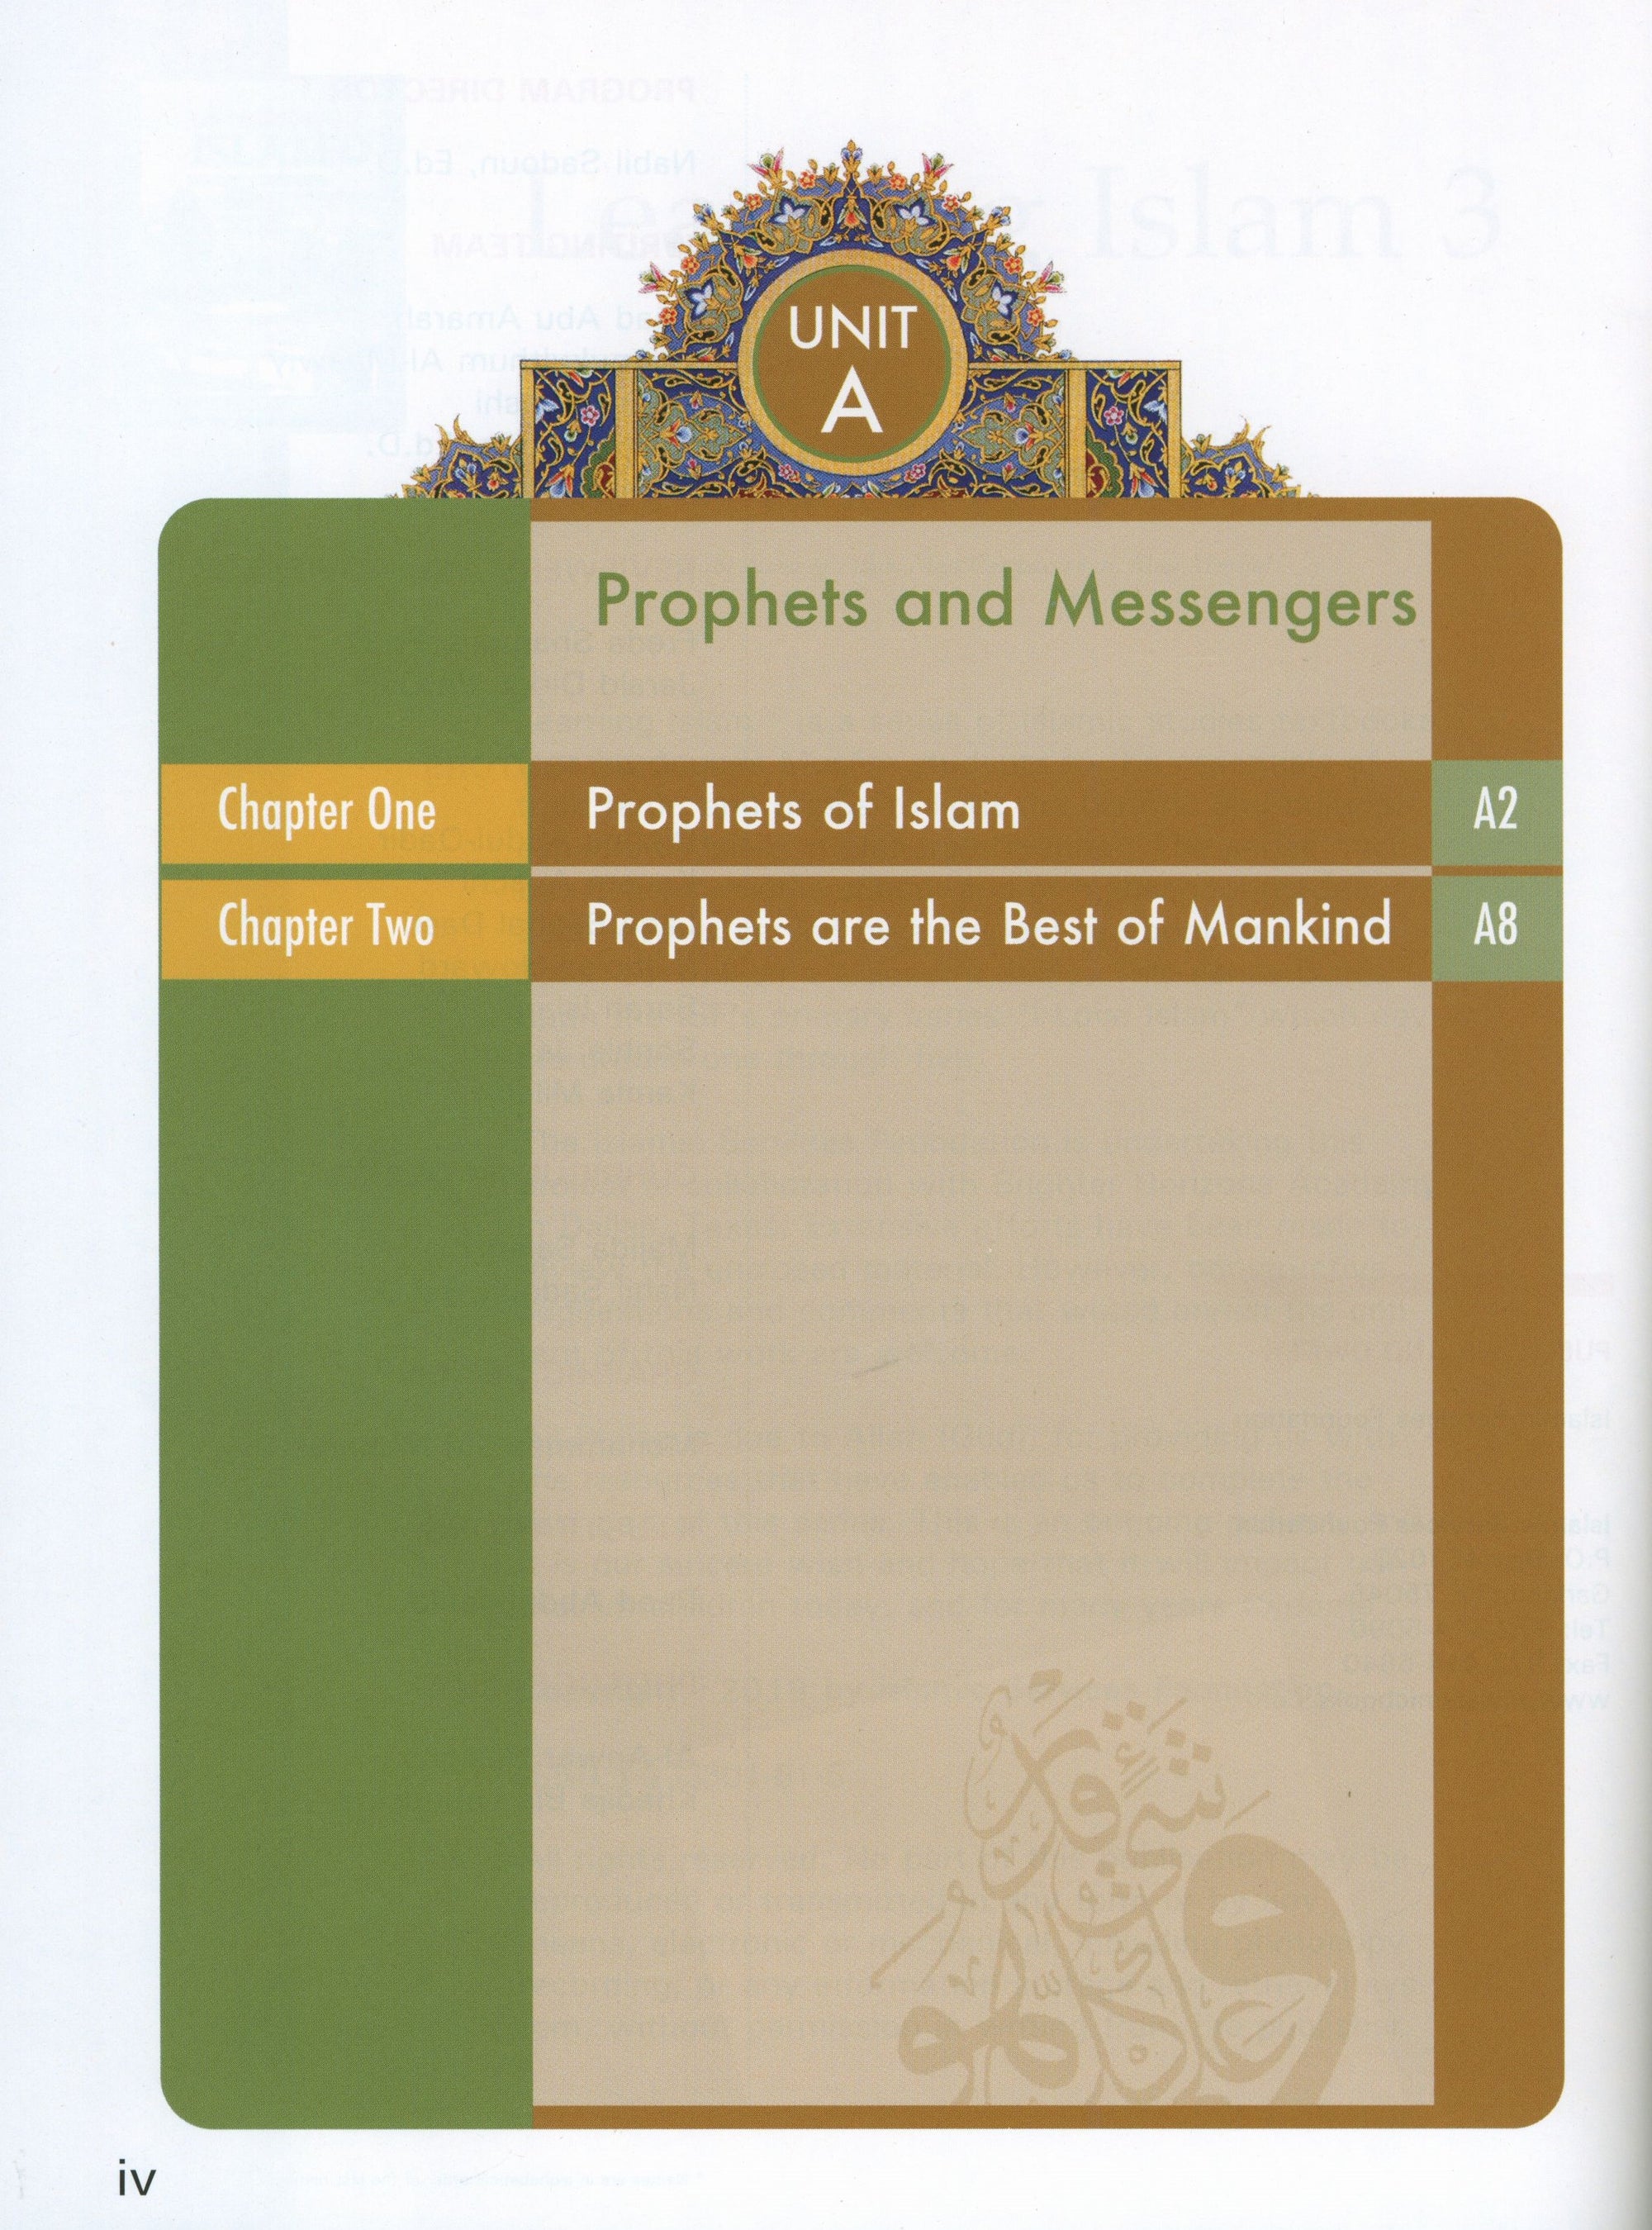 Learning Islam Weekend Edition Textbook Level 3 (8th Grade)